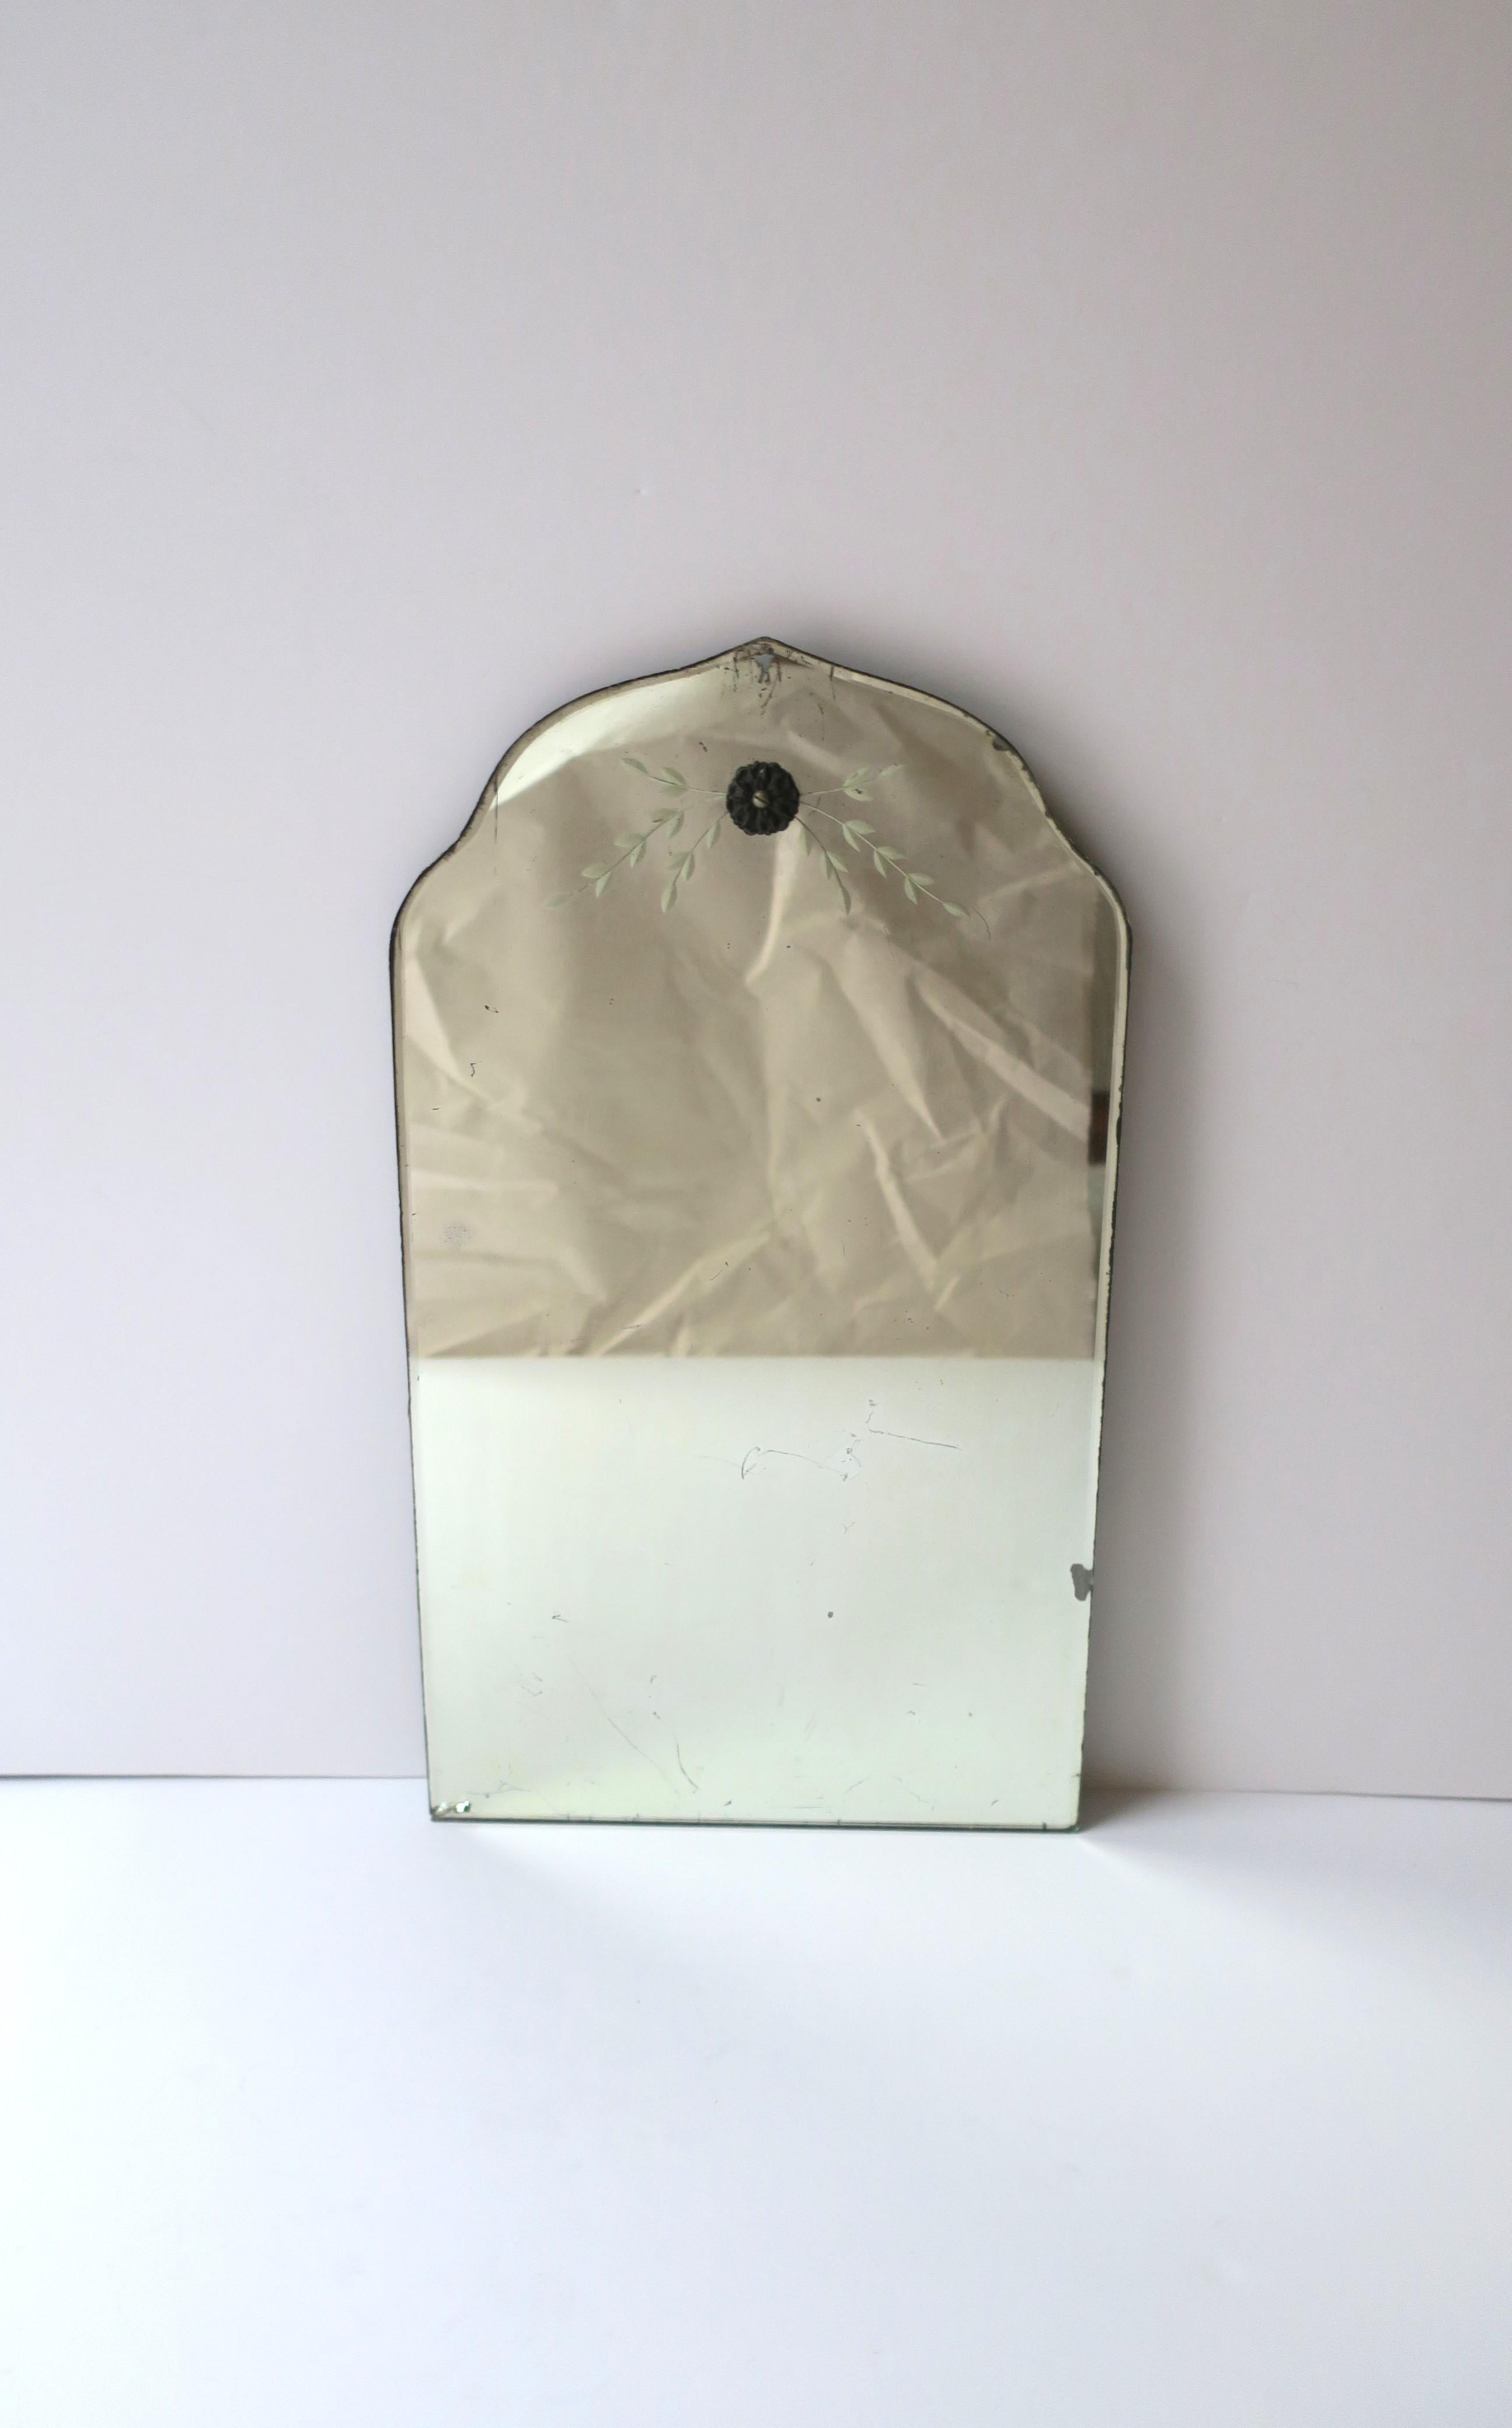 A small antique wall mirror with Moorish design around top edge, circa early-20th century. Mirror has a Moorish design around top edge, metal floweret and etched sprayed leaf design at top center of mirrored glass. A great piece where a small mirror